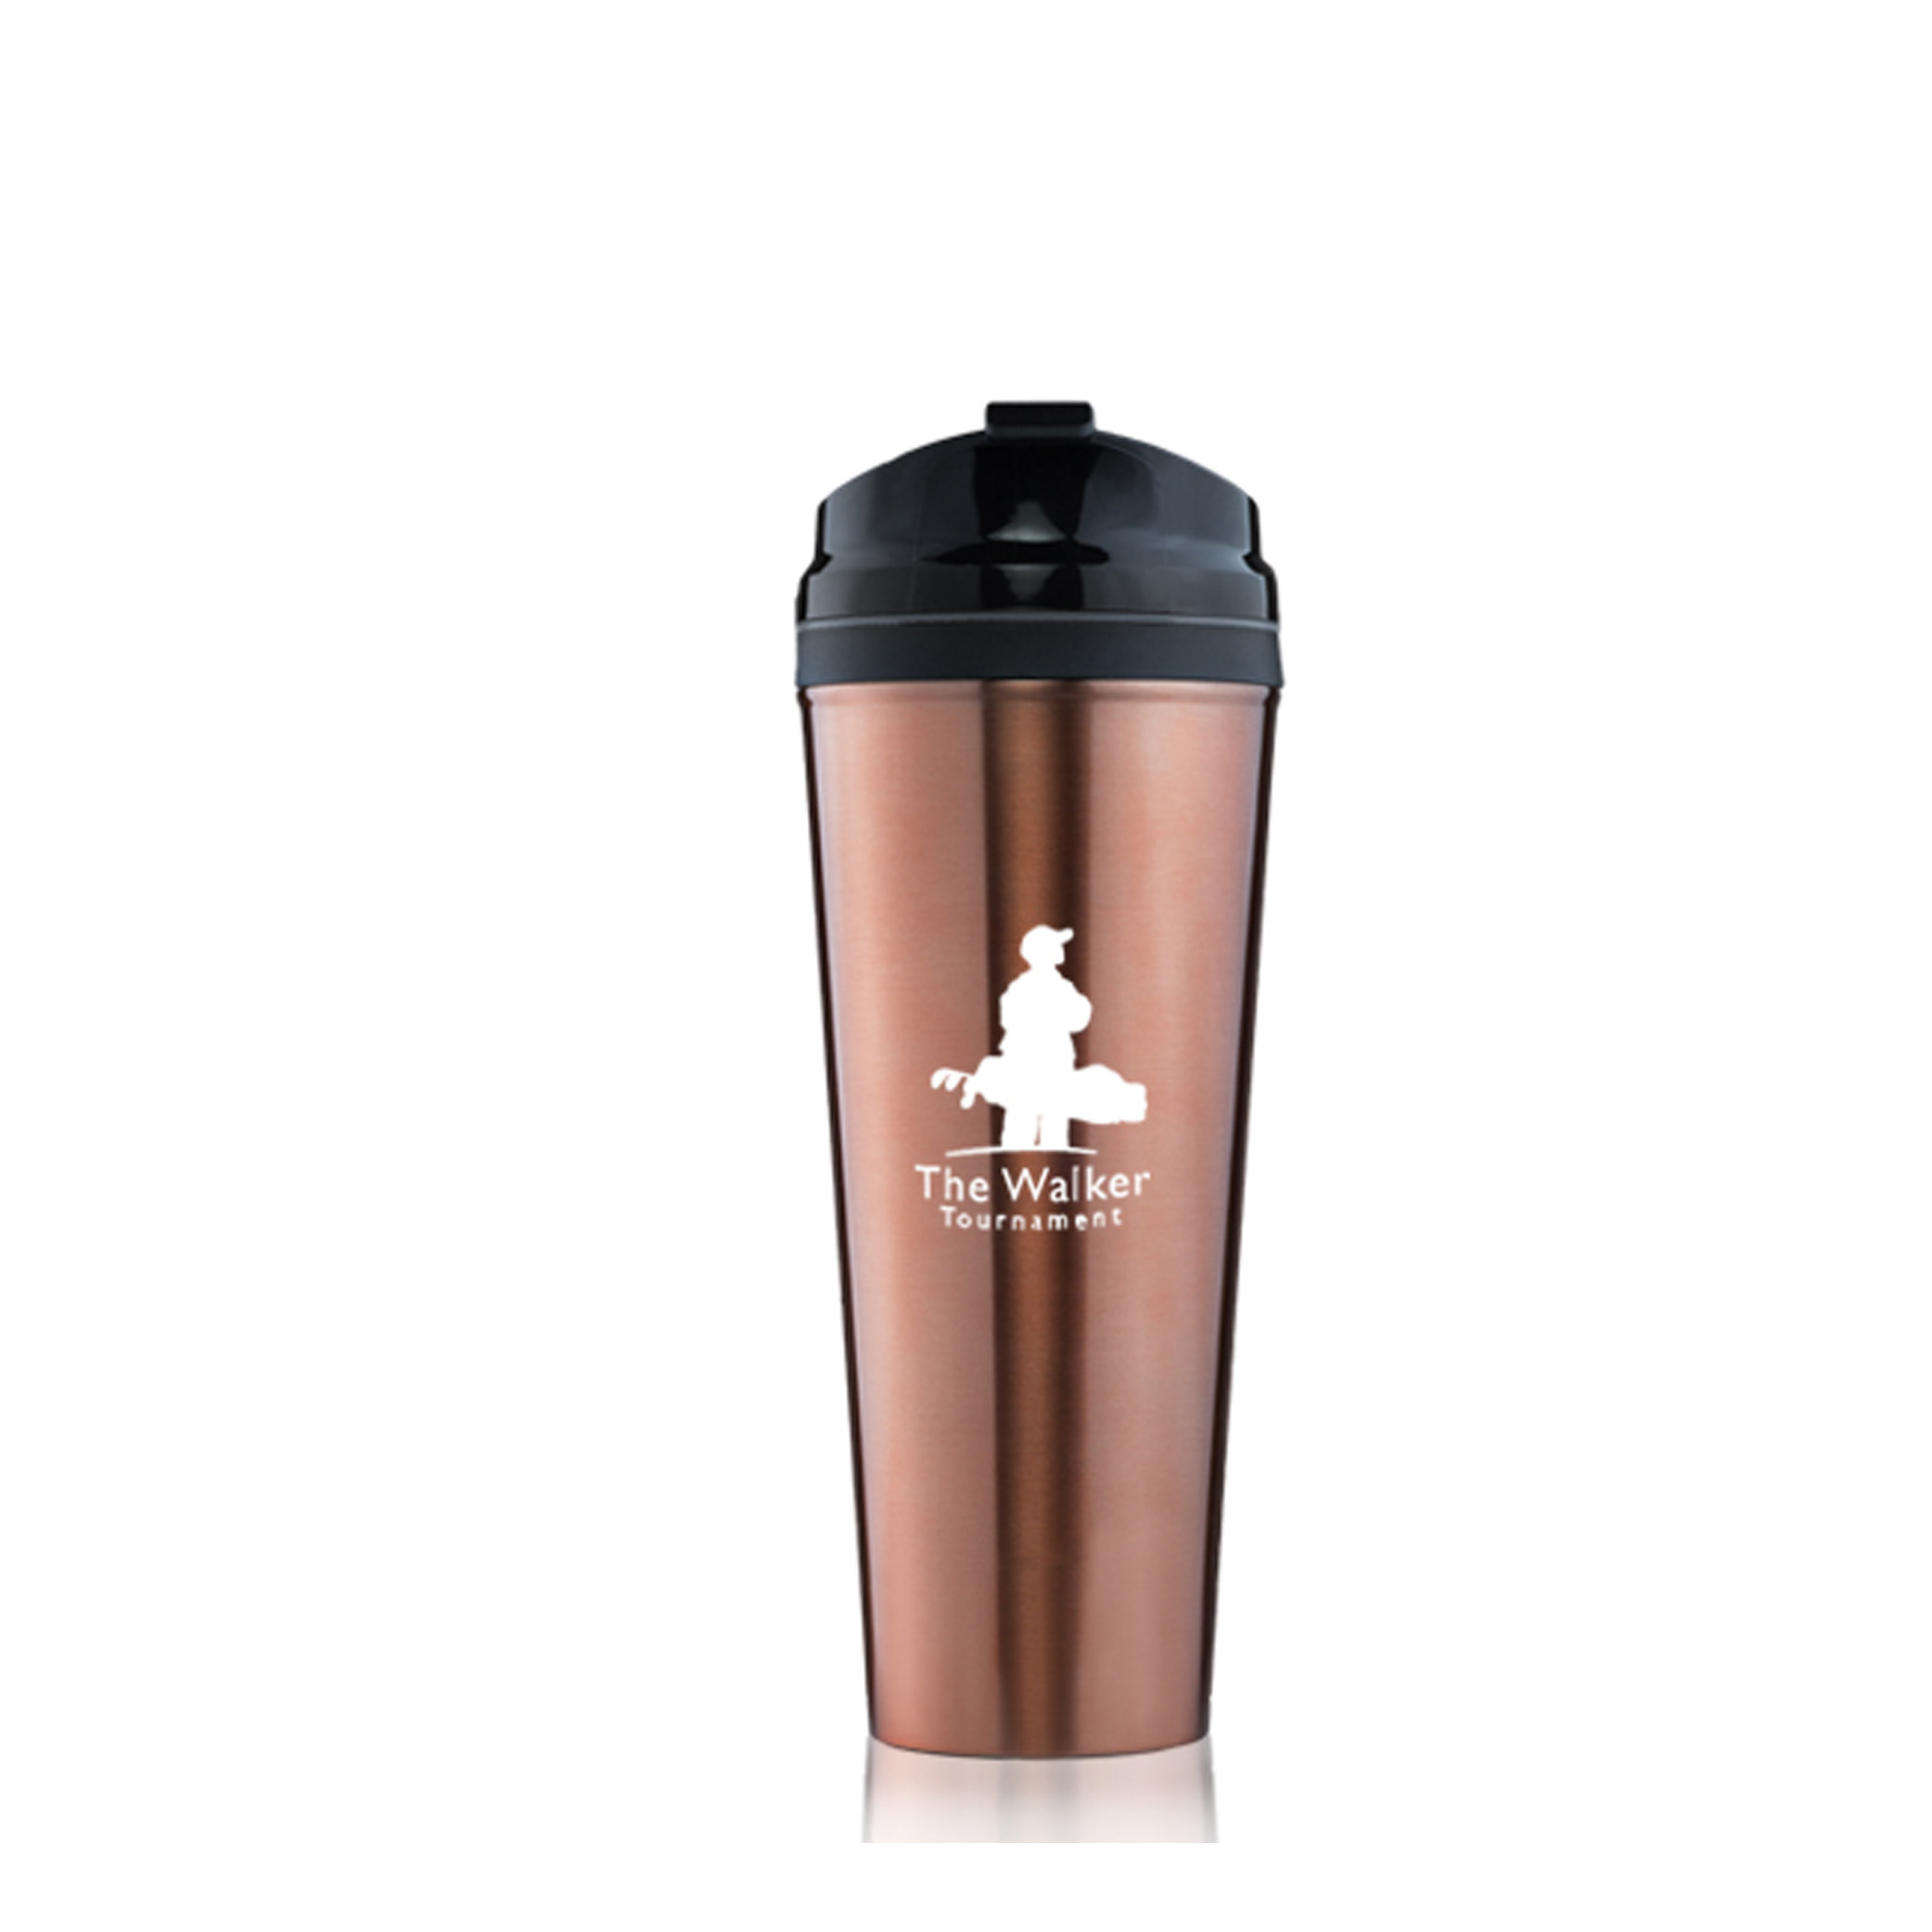 Stainless Steel Travel Mugs w/ Plastic Liner and Lid